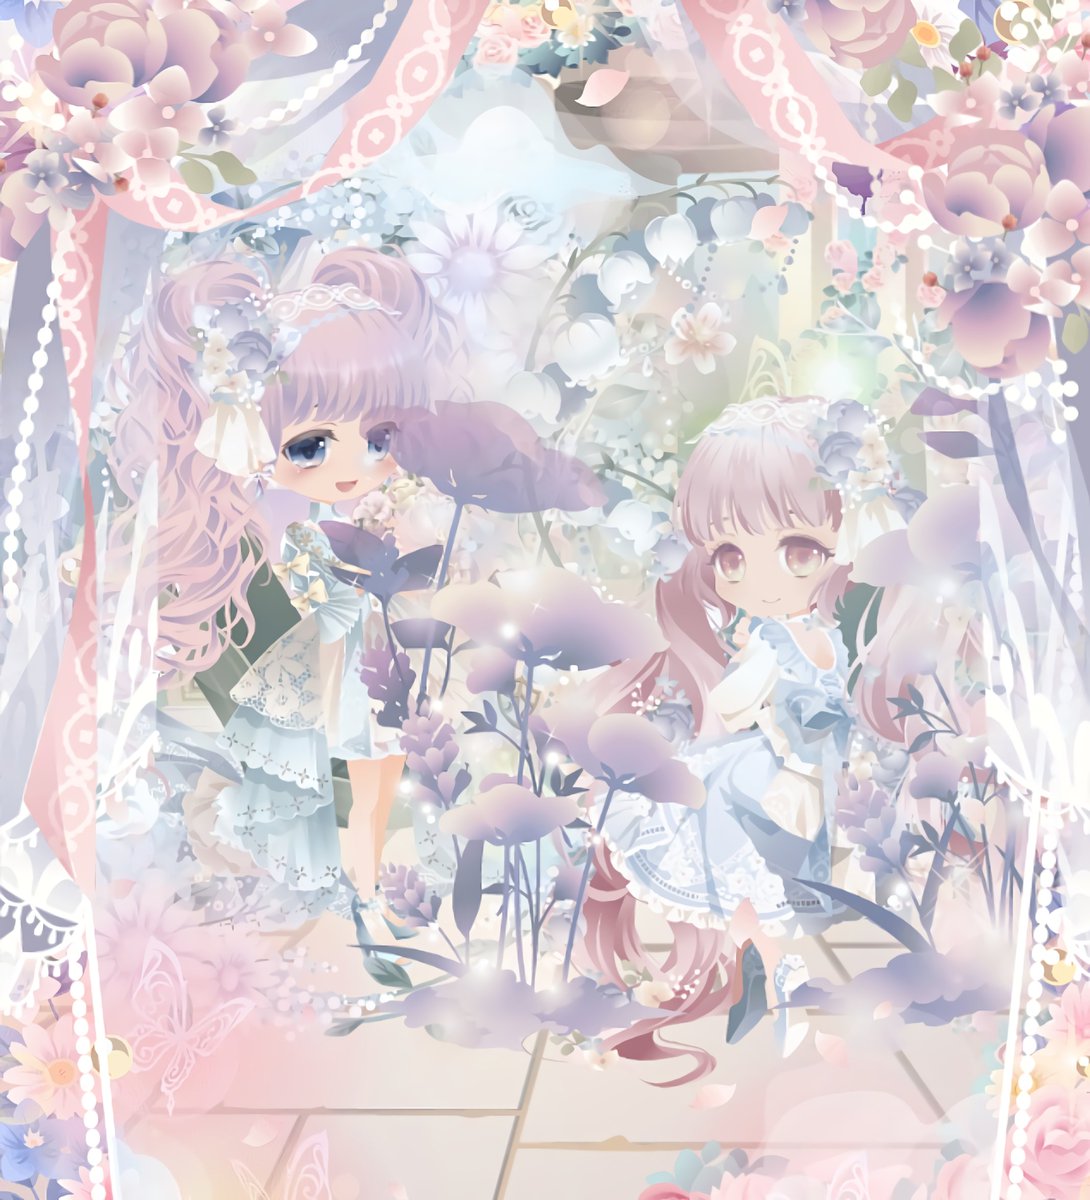 Tenderly hide, and Kindly seek.#ココプレ #CocoPPaPlay Converted by #waifu2x 